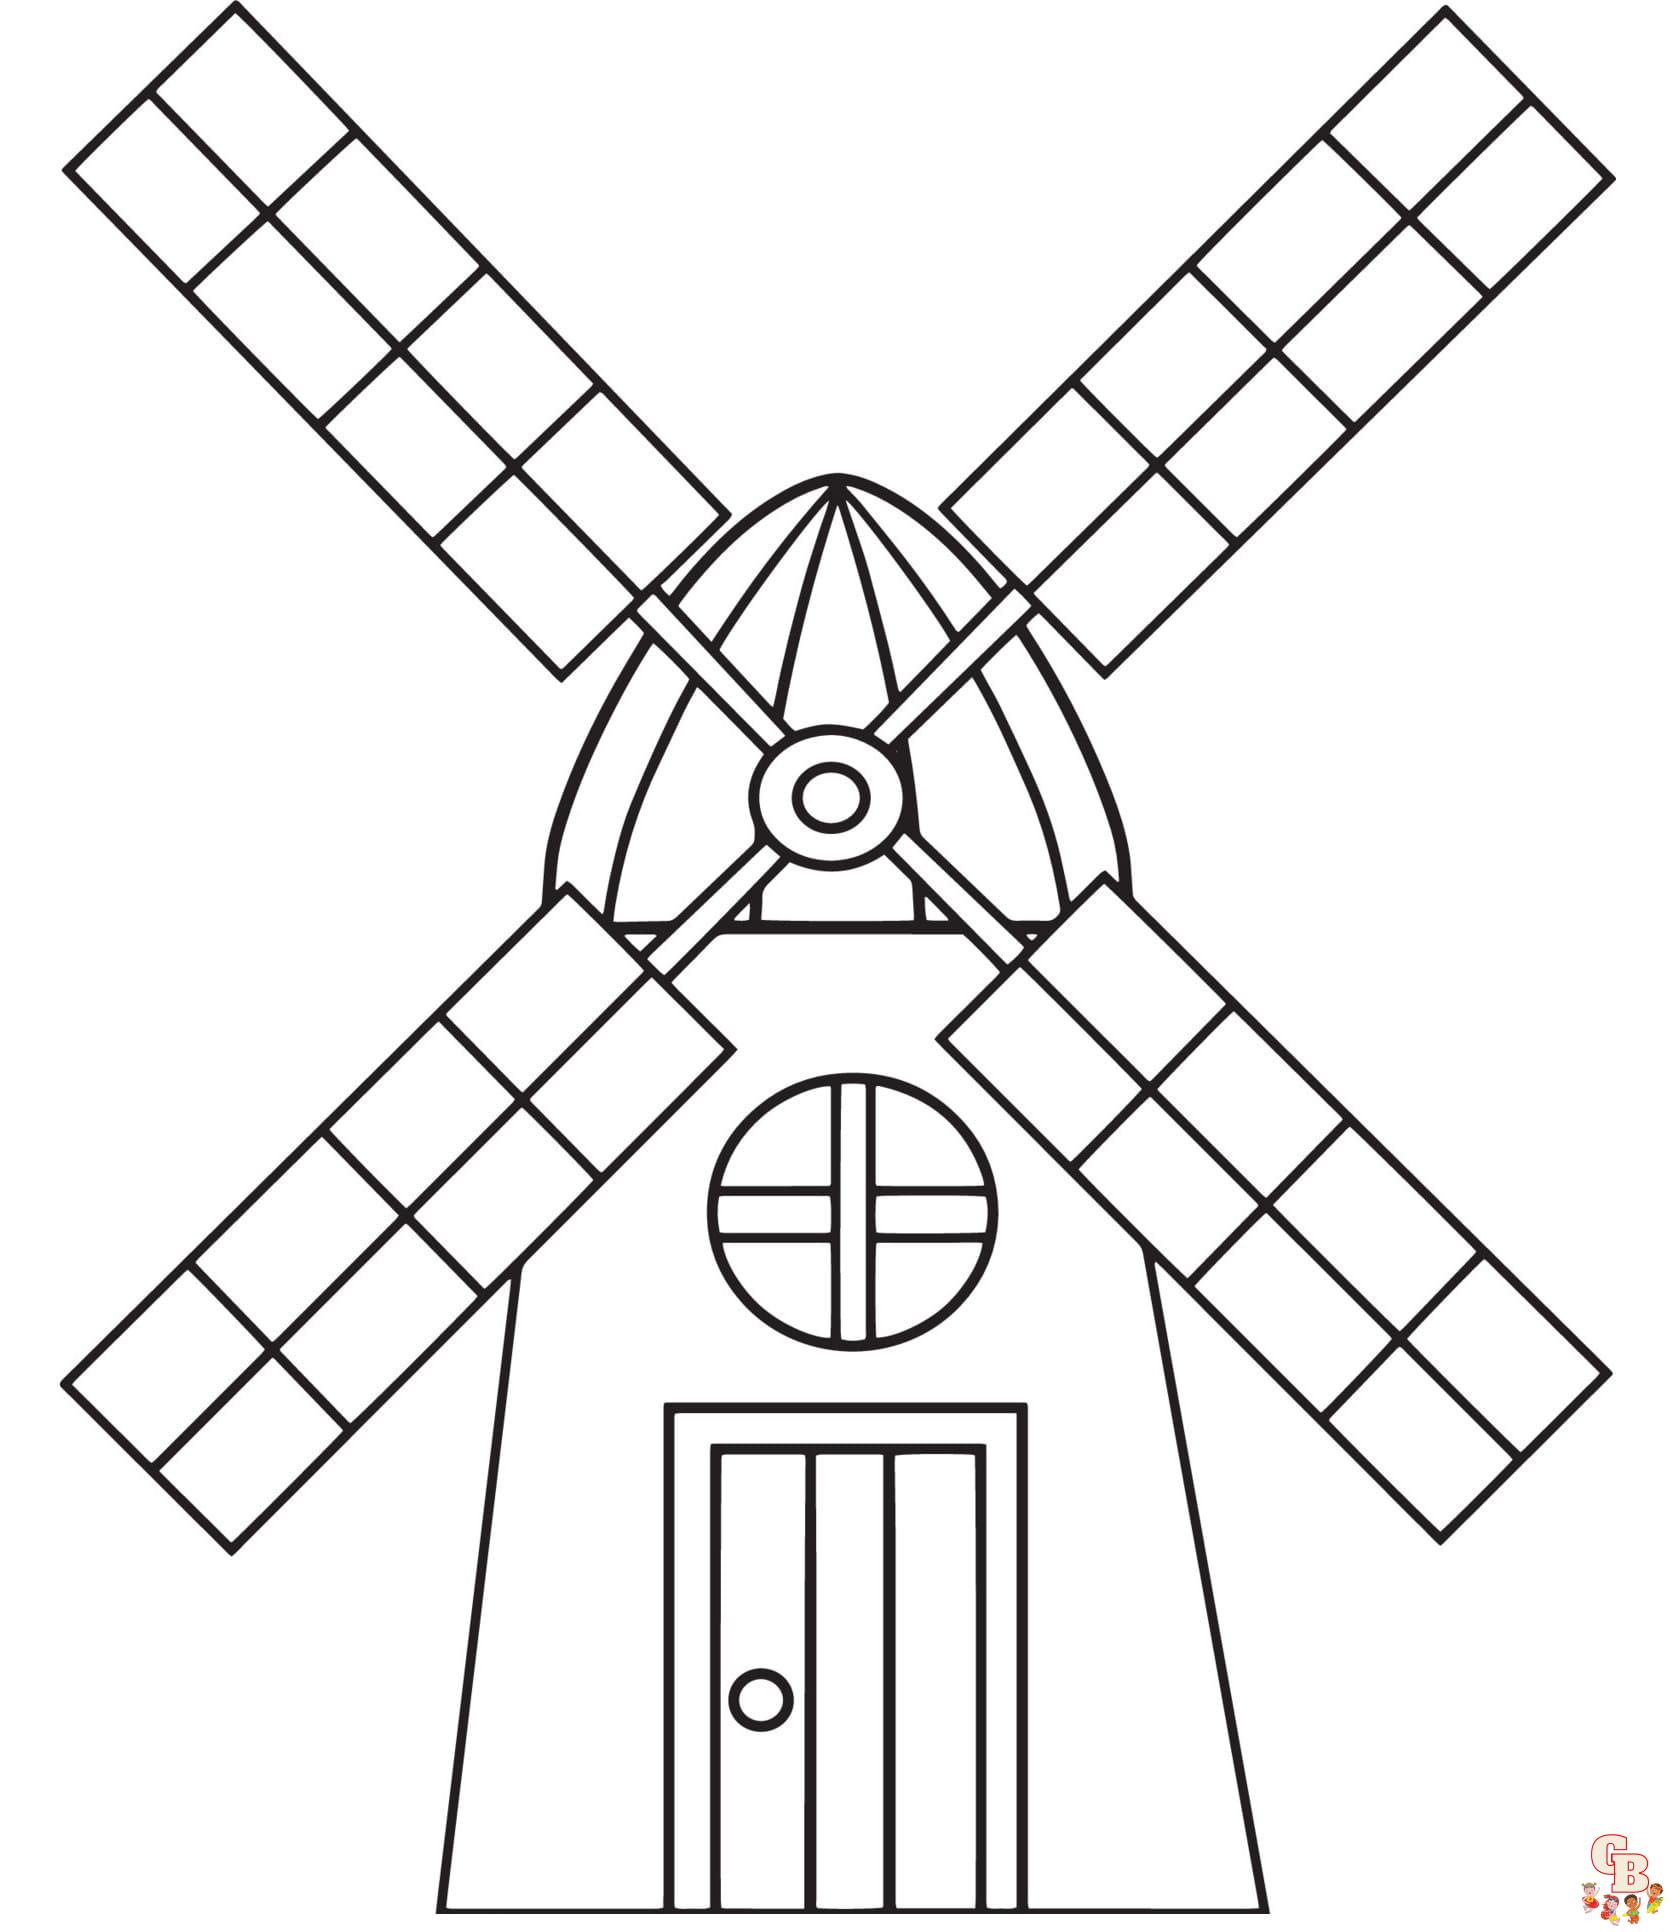 Windmill coloring pages free